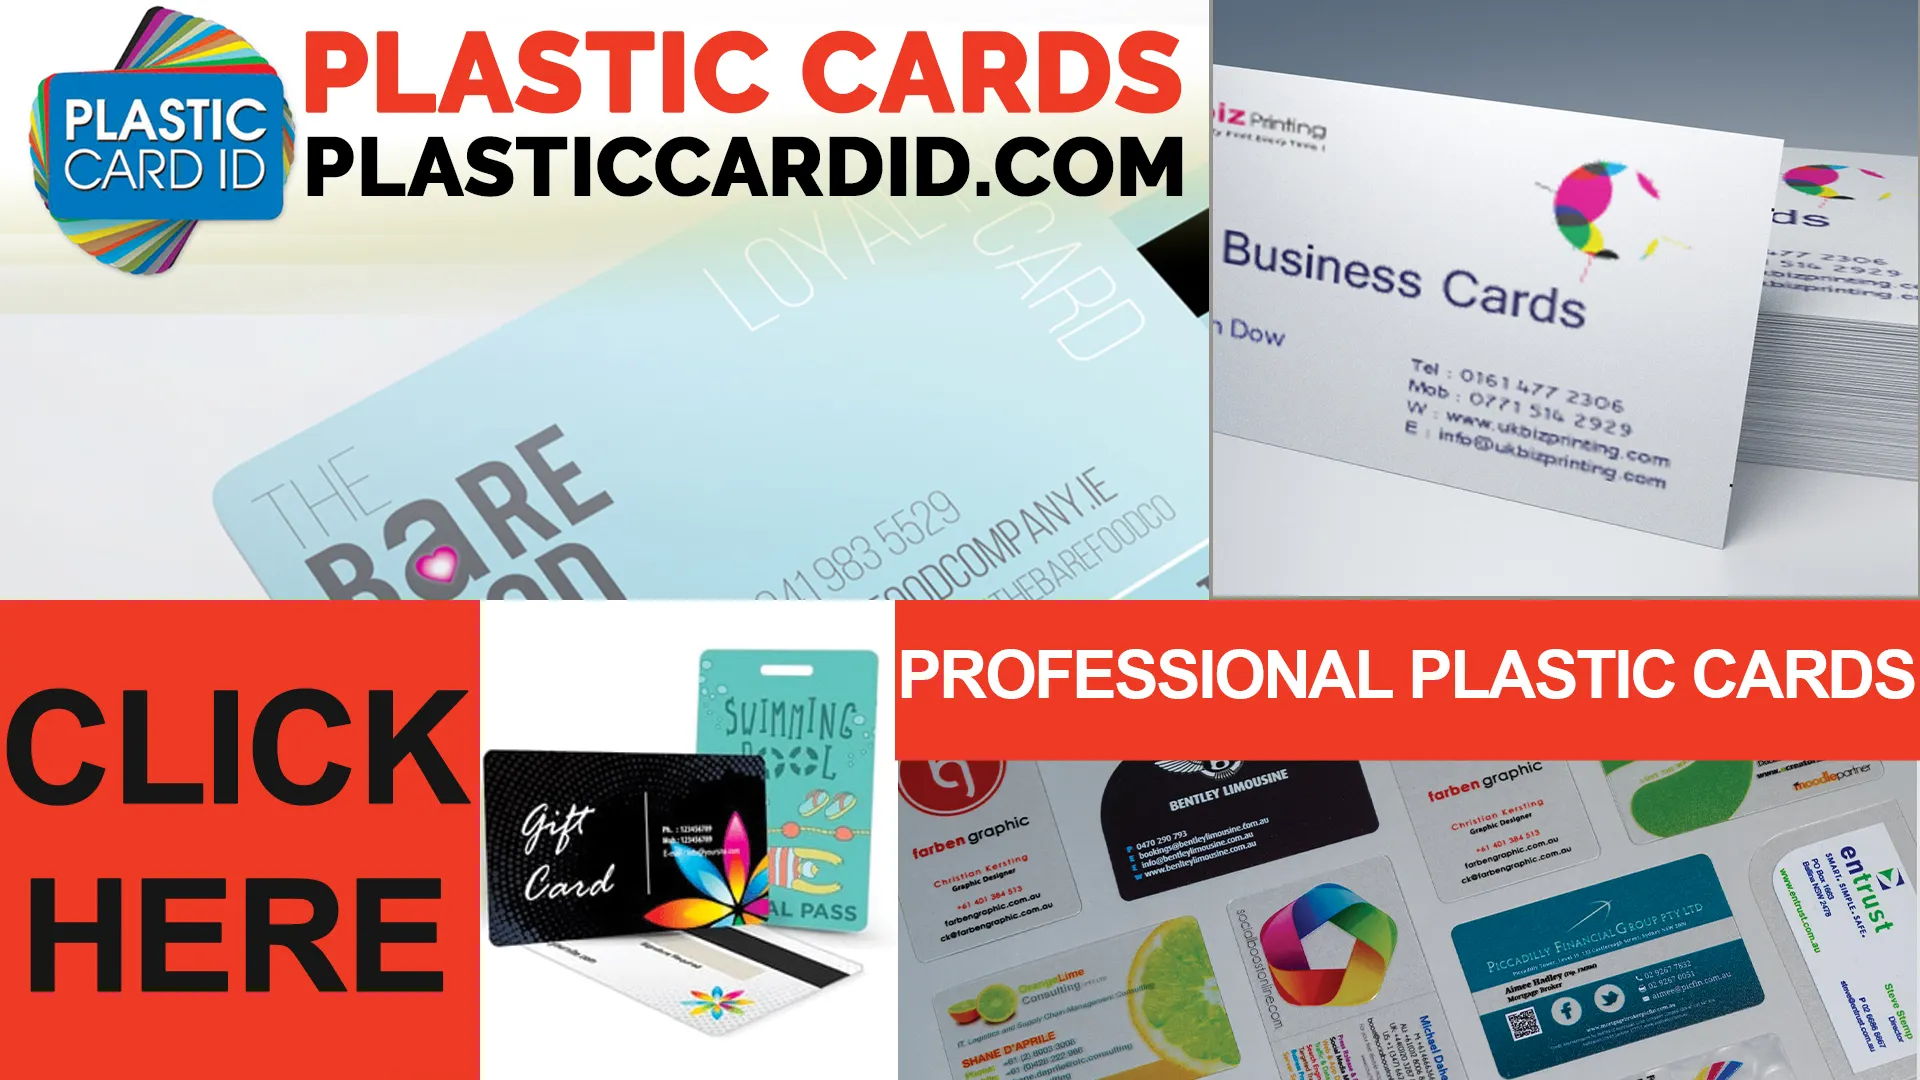 Welcome to the world of Eco-Conscious Choices with Plastic Card ID




